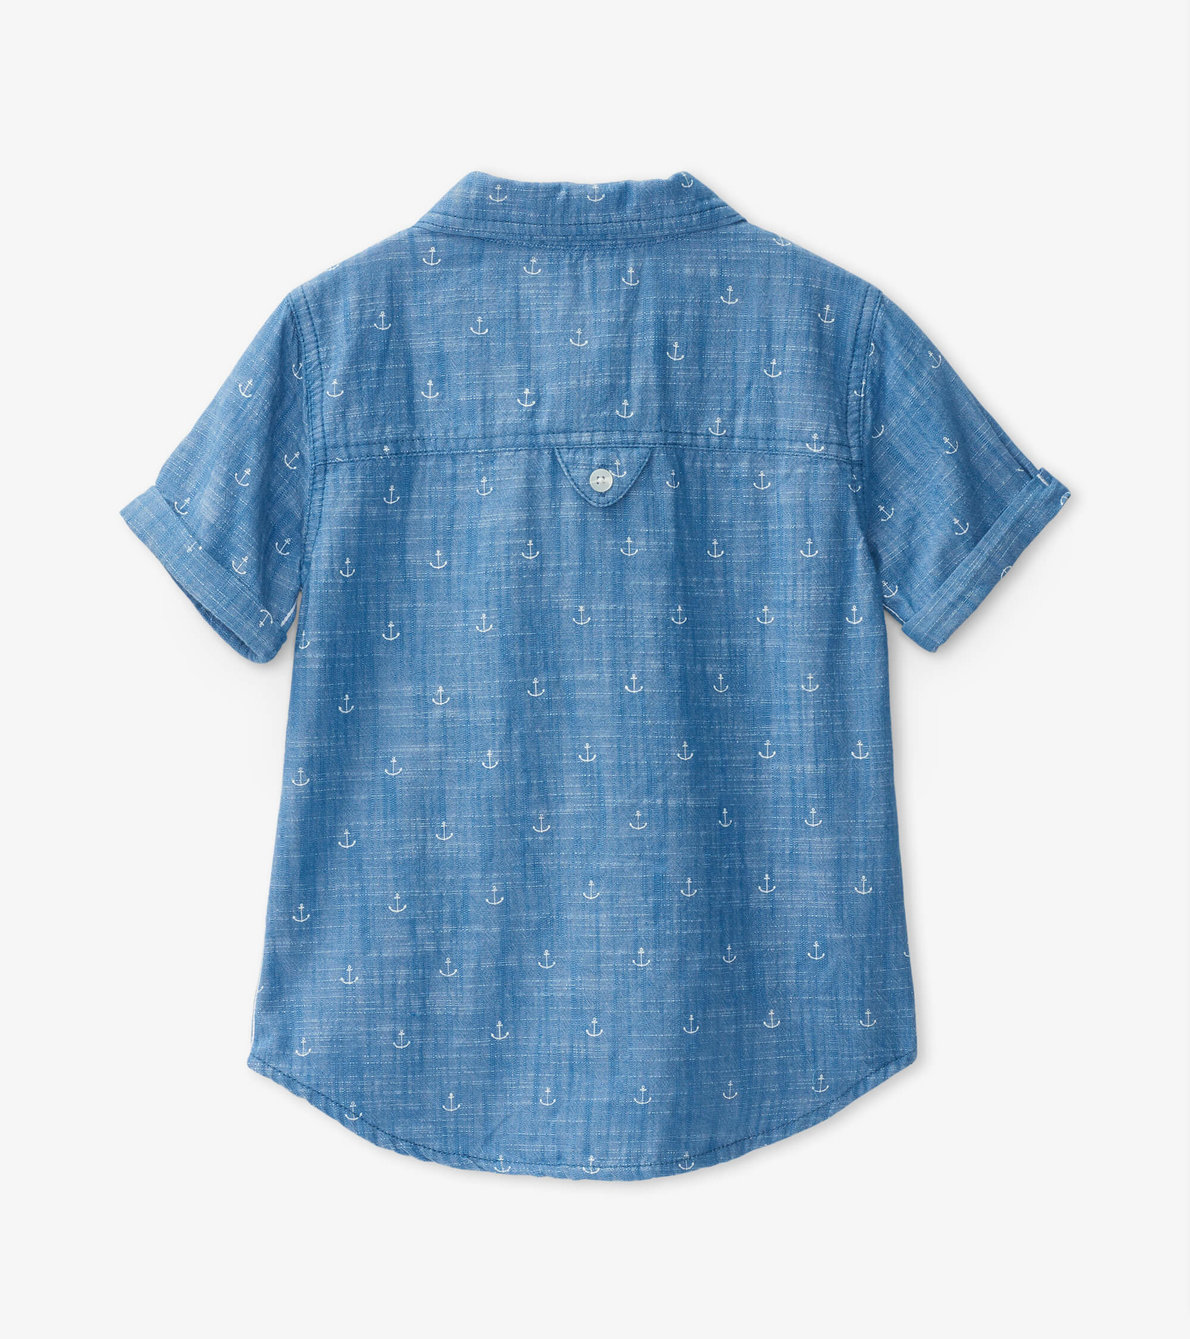 View larger image of Chambray Anchors Short Sleeve Button Down Shirt